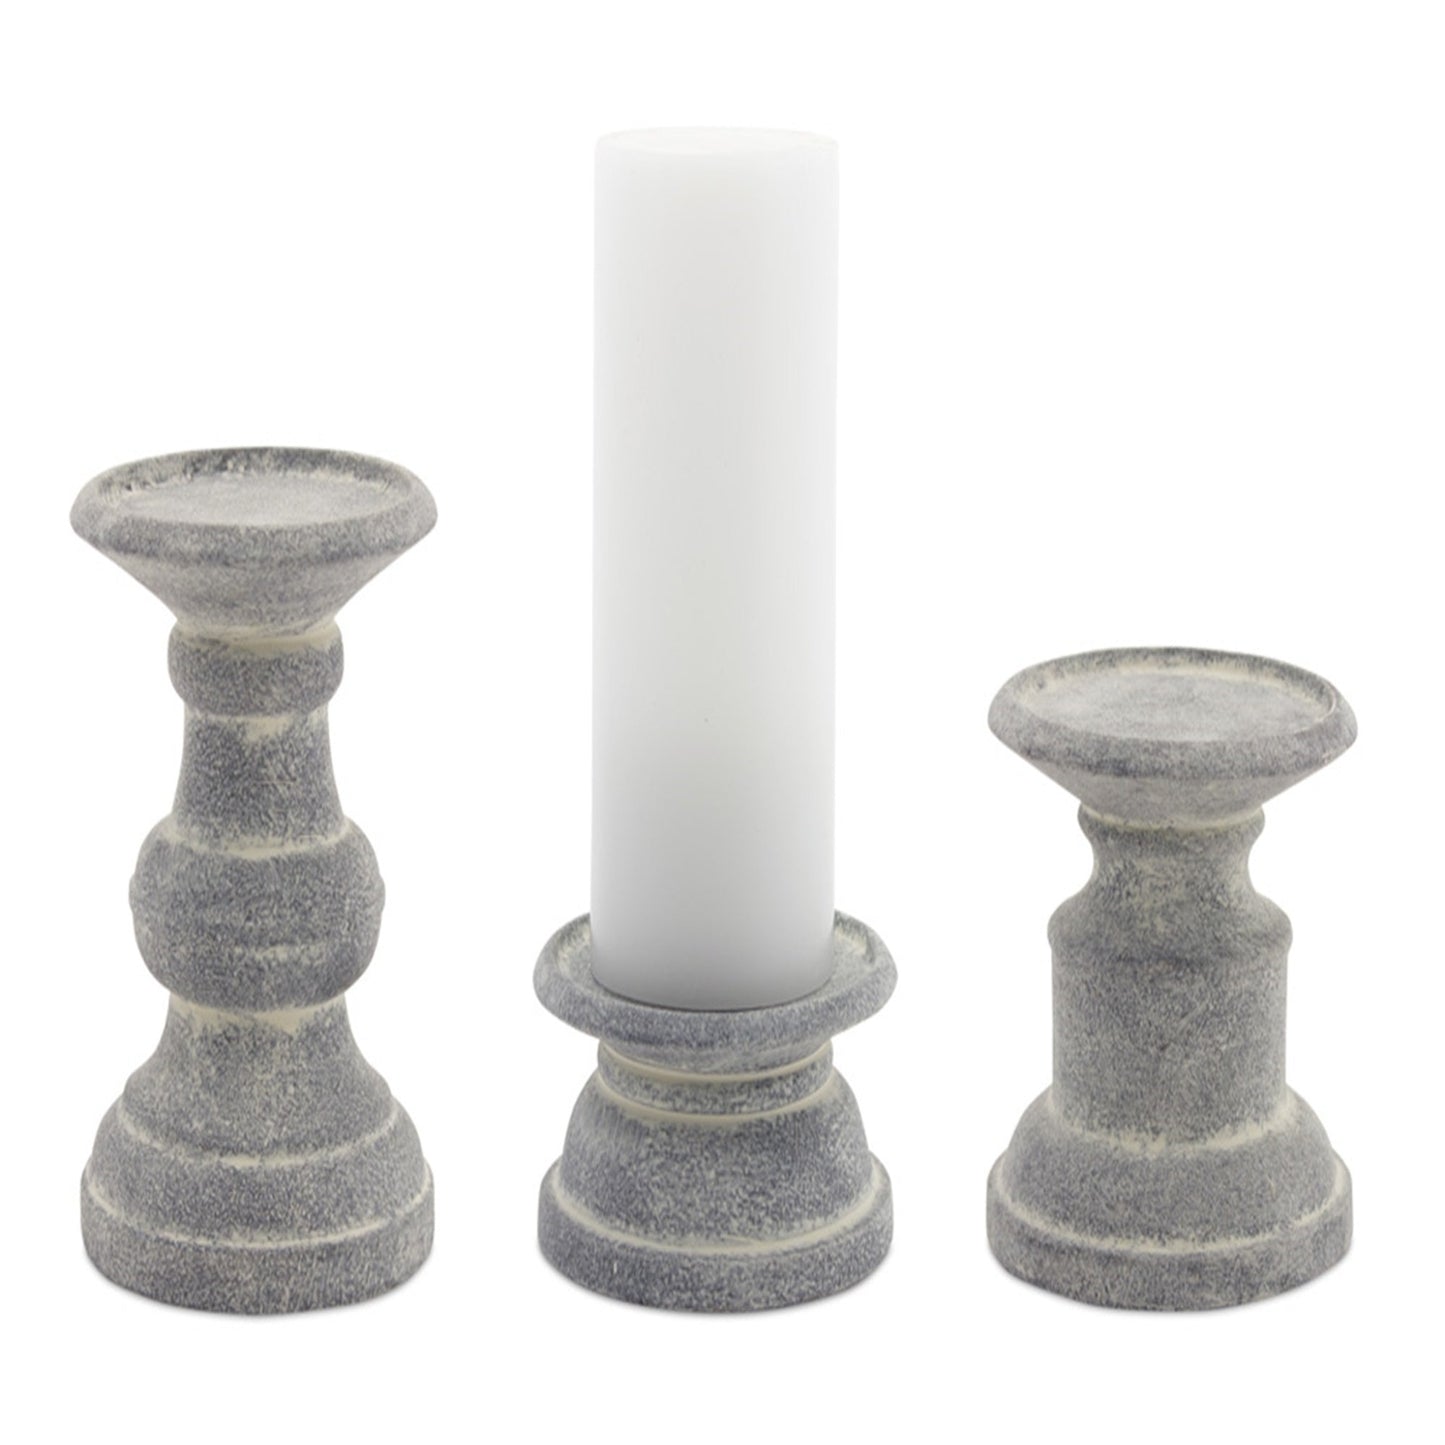 Terra cotta candle holders, set of 6, elegant pedestal style candle holders have the look and feel of aged concrete